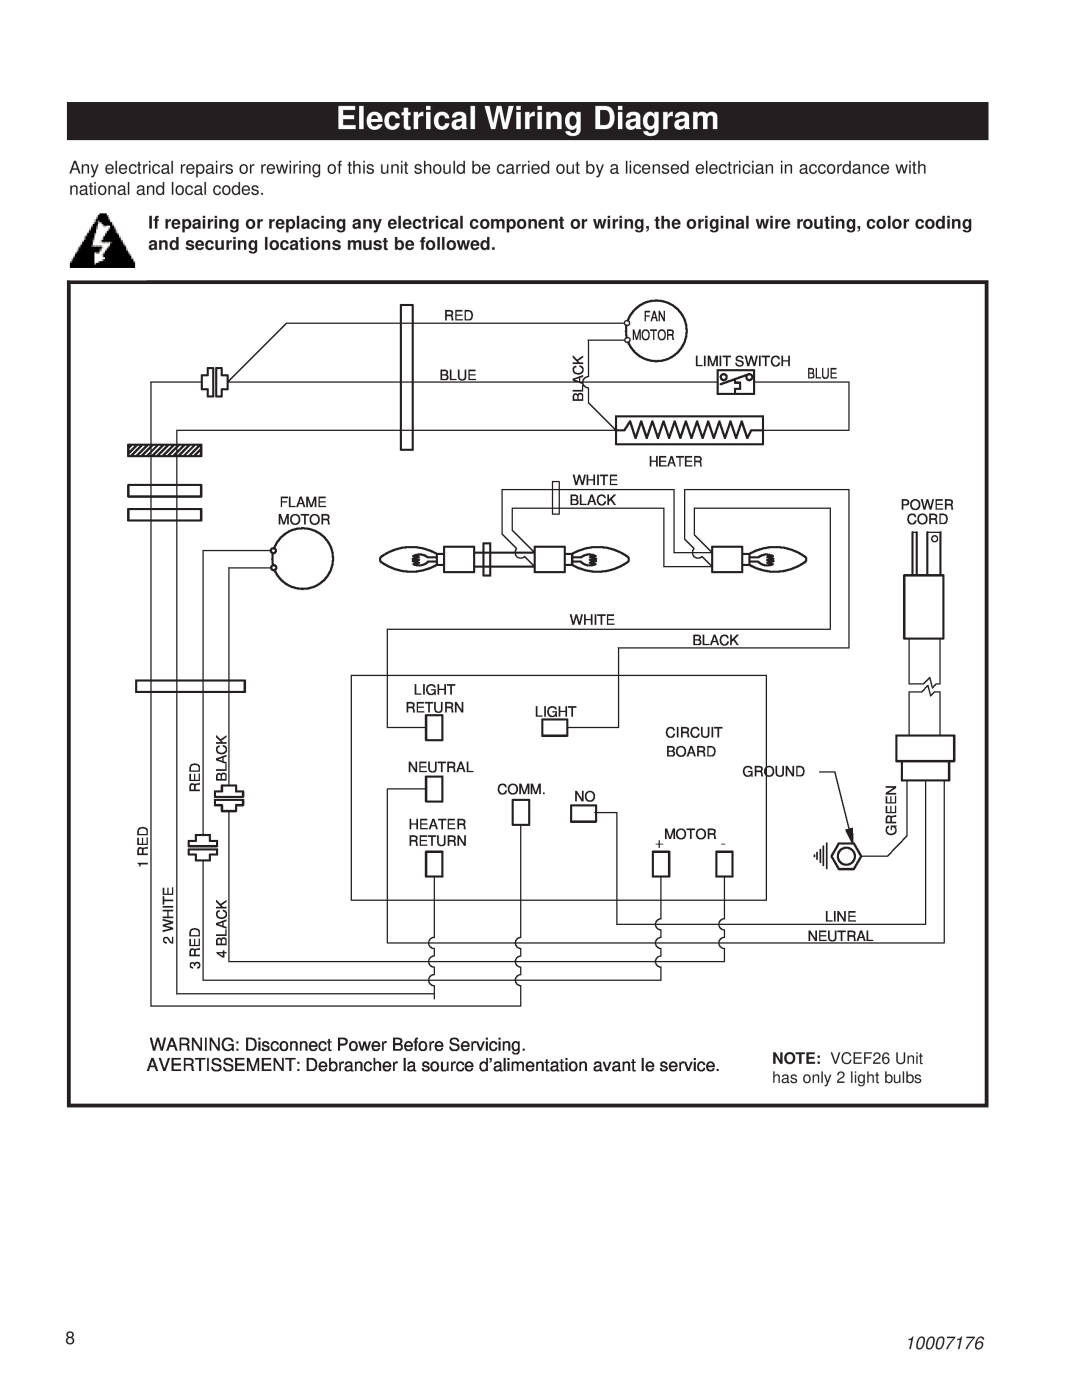 Vermont Casting VCEF36, VCEF33, VCEF26 Electrical Wiring Diagram, WARNING Disconnect Power Before Servicing, 10007176 